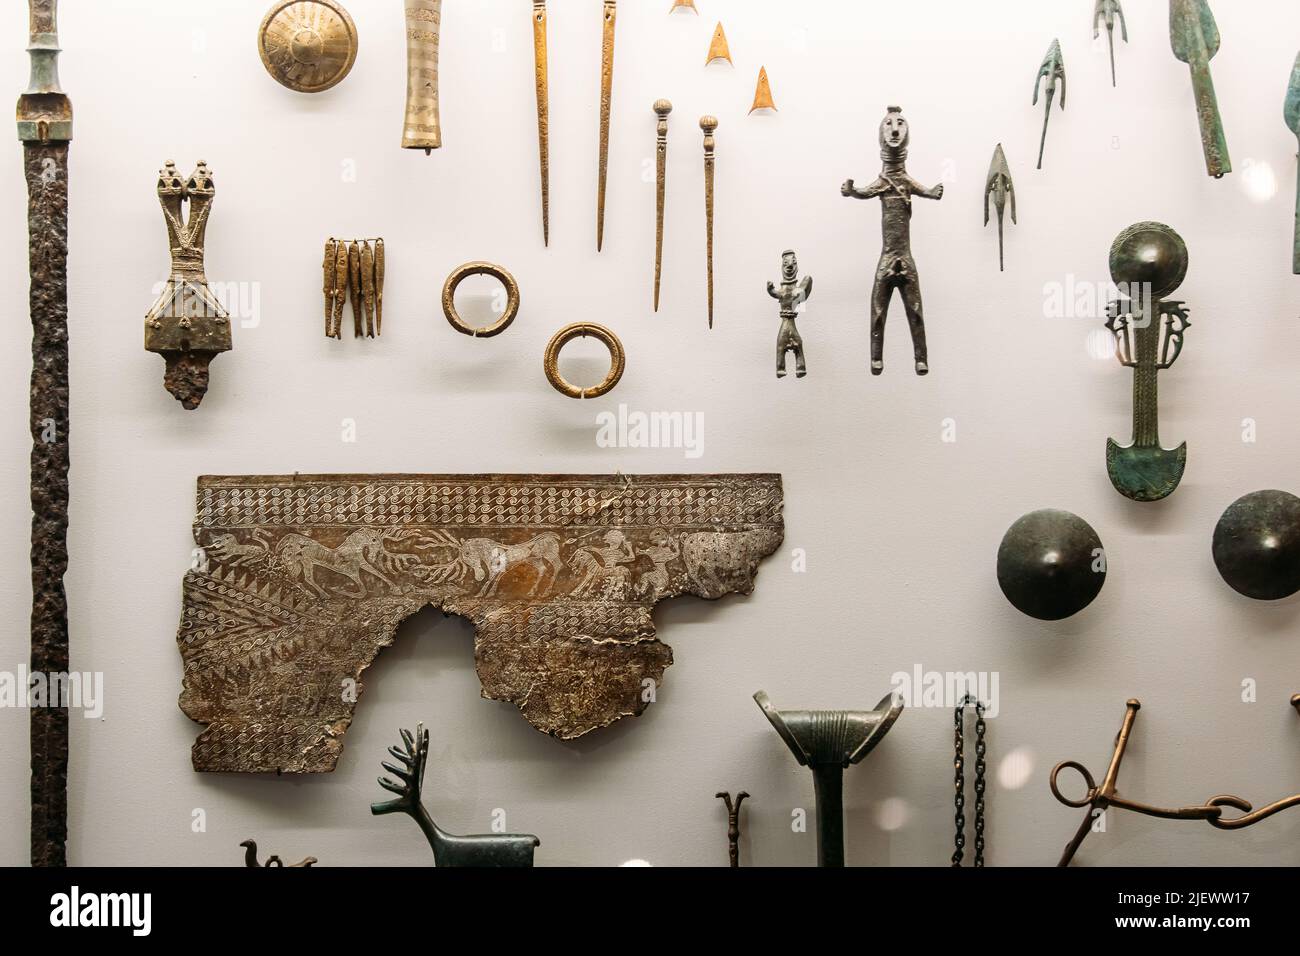 Tbilisi, Georgia. Georgian National Museum. Museum Exhibits Of Various Antique Household Items. Jewelry, Bracelets. Various Old Hairpins, Arrowheads. Stock Photo